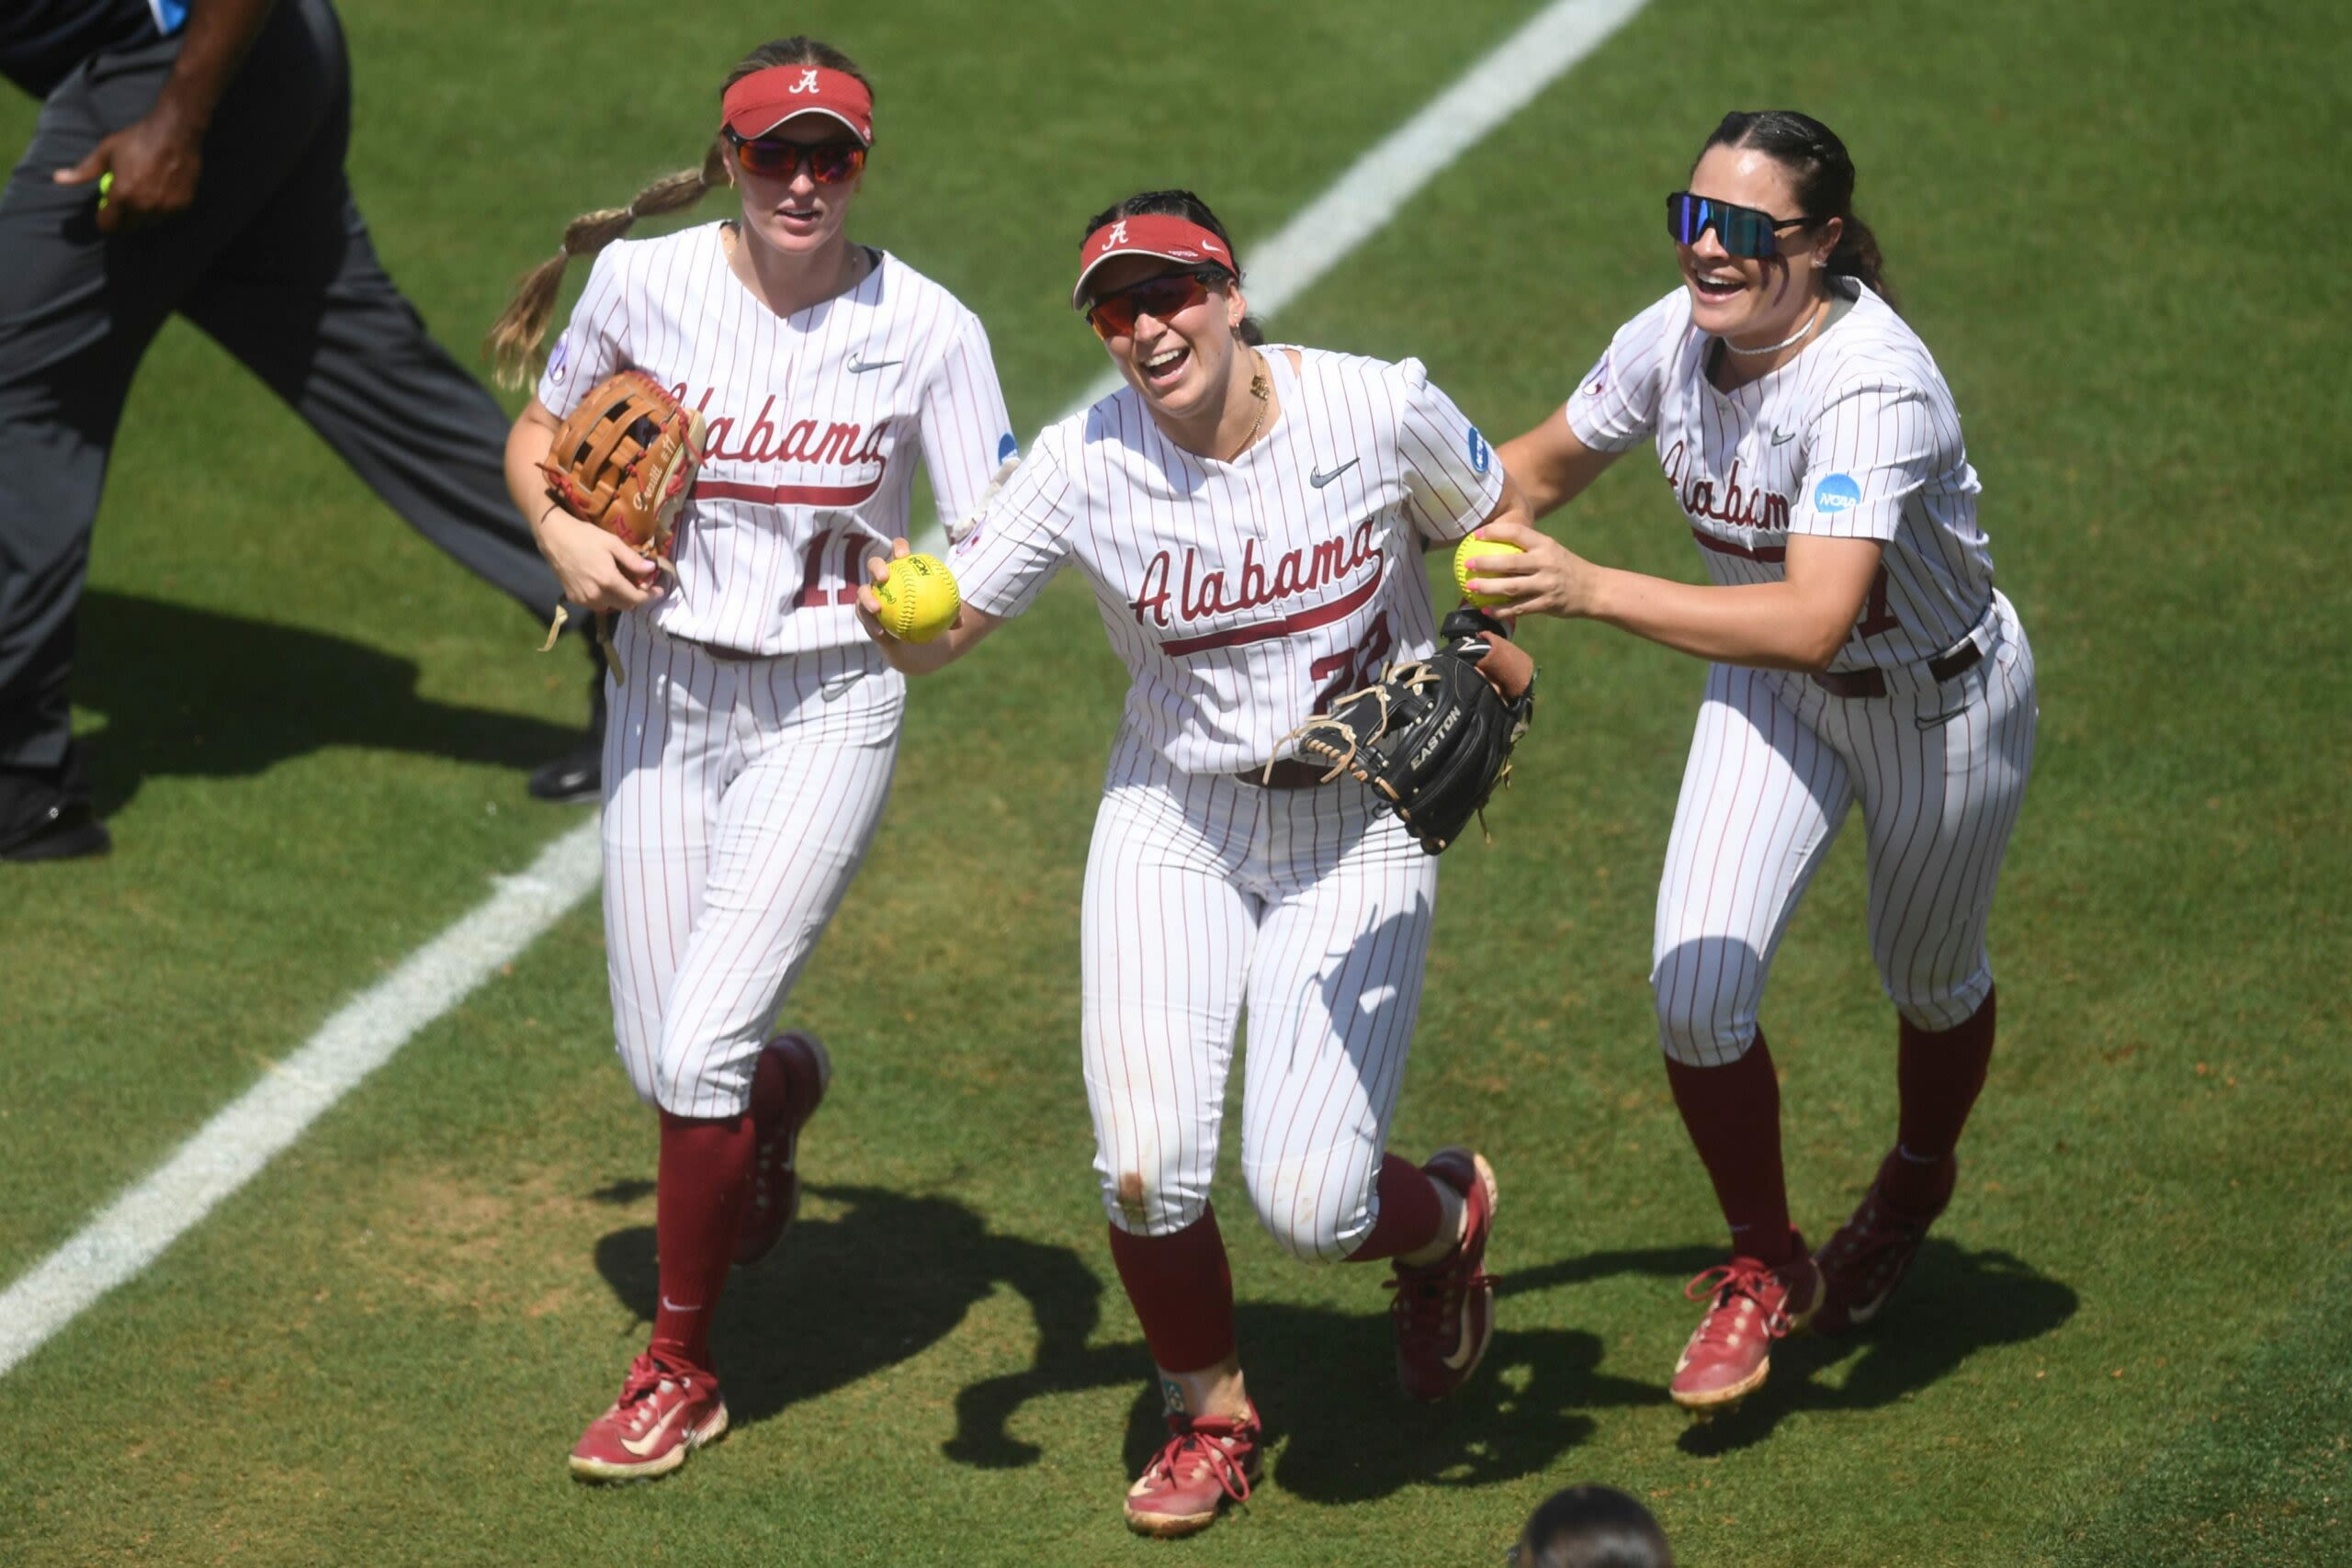 Alabama softball wins 14-inning thriller over Lady Vols in Knoxville Super Regional